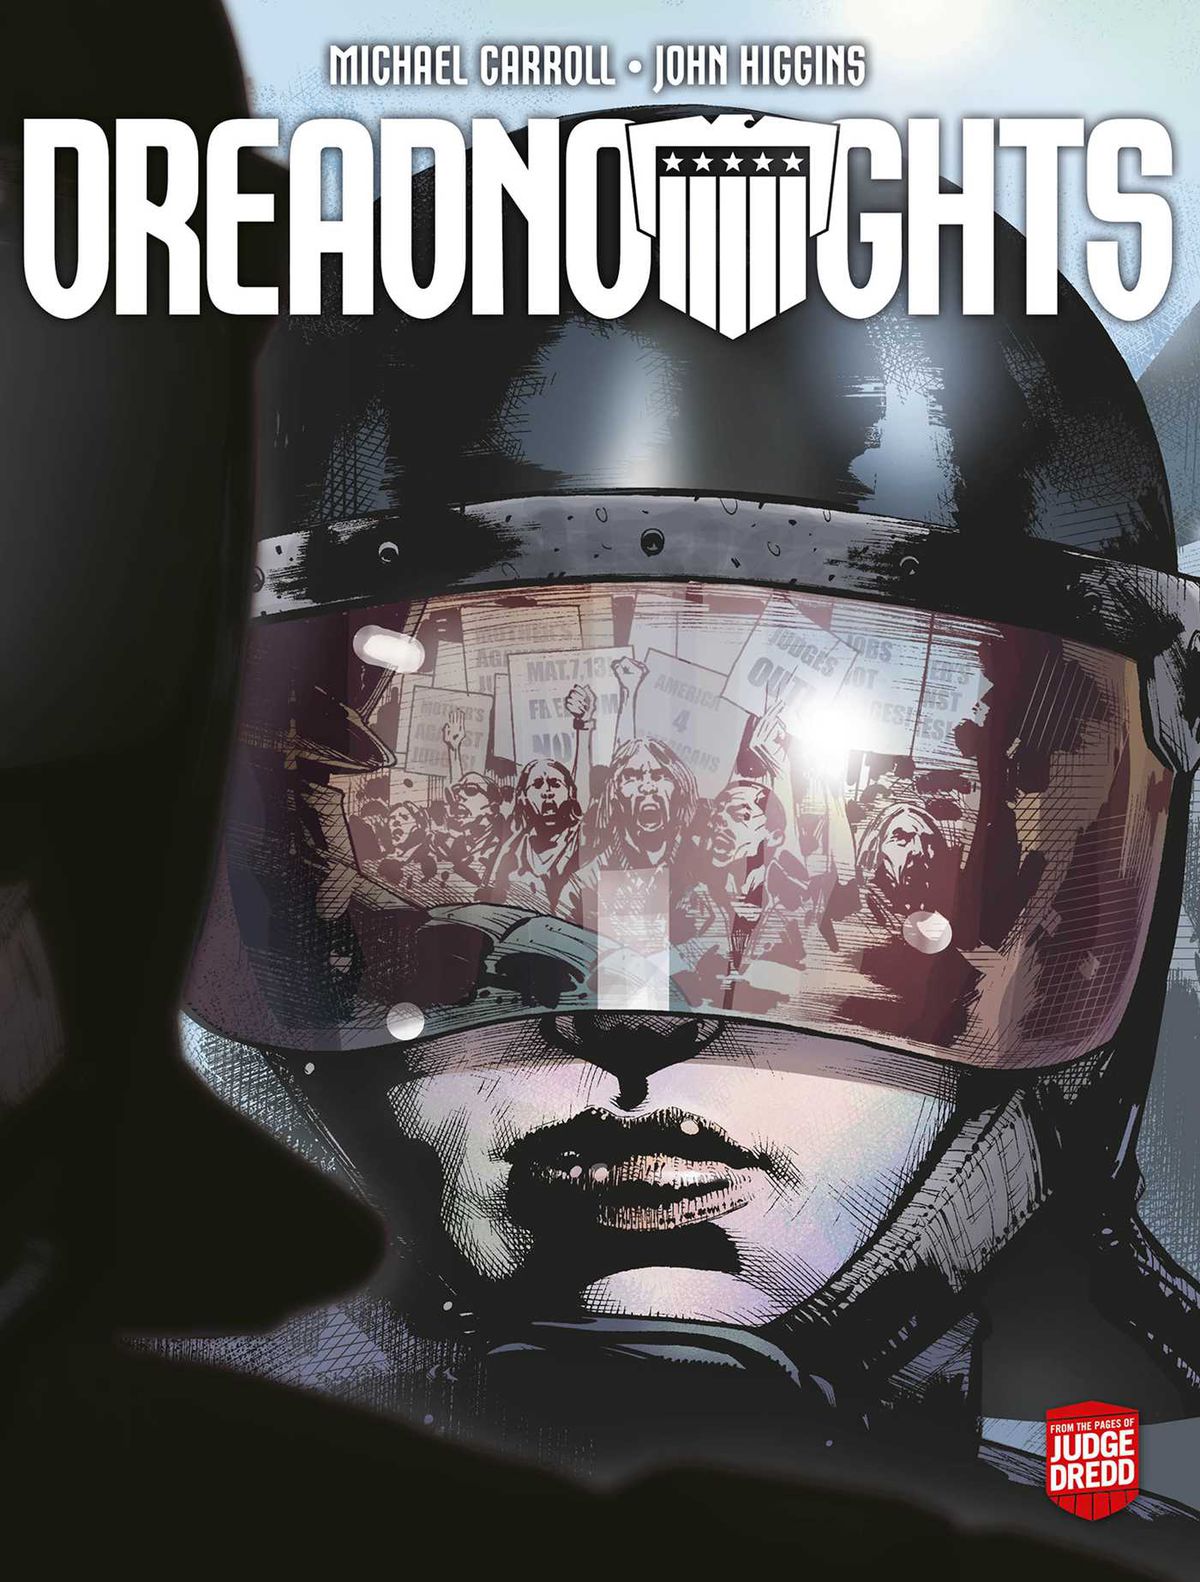 A policewoman in riot gear, her helmet reflecting a crowd of protestors carrying signs on the cover of Dreadnoughts: Breaking Ground (2021).